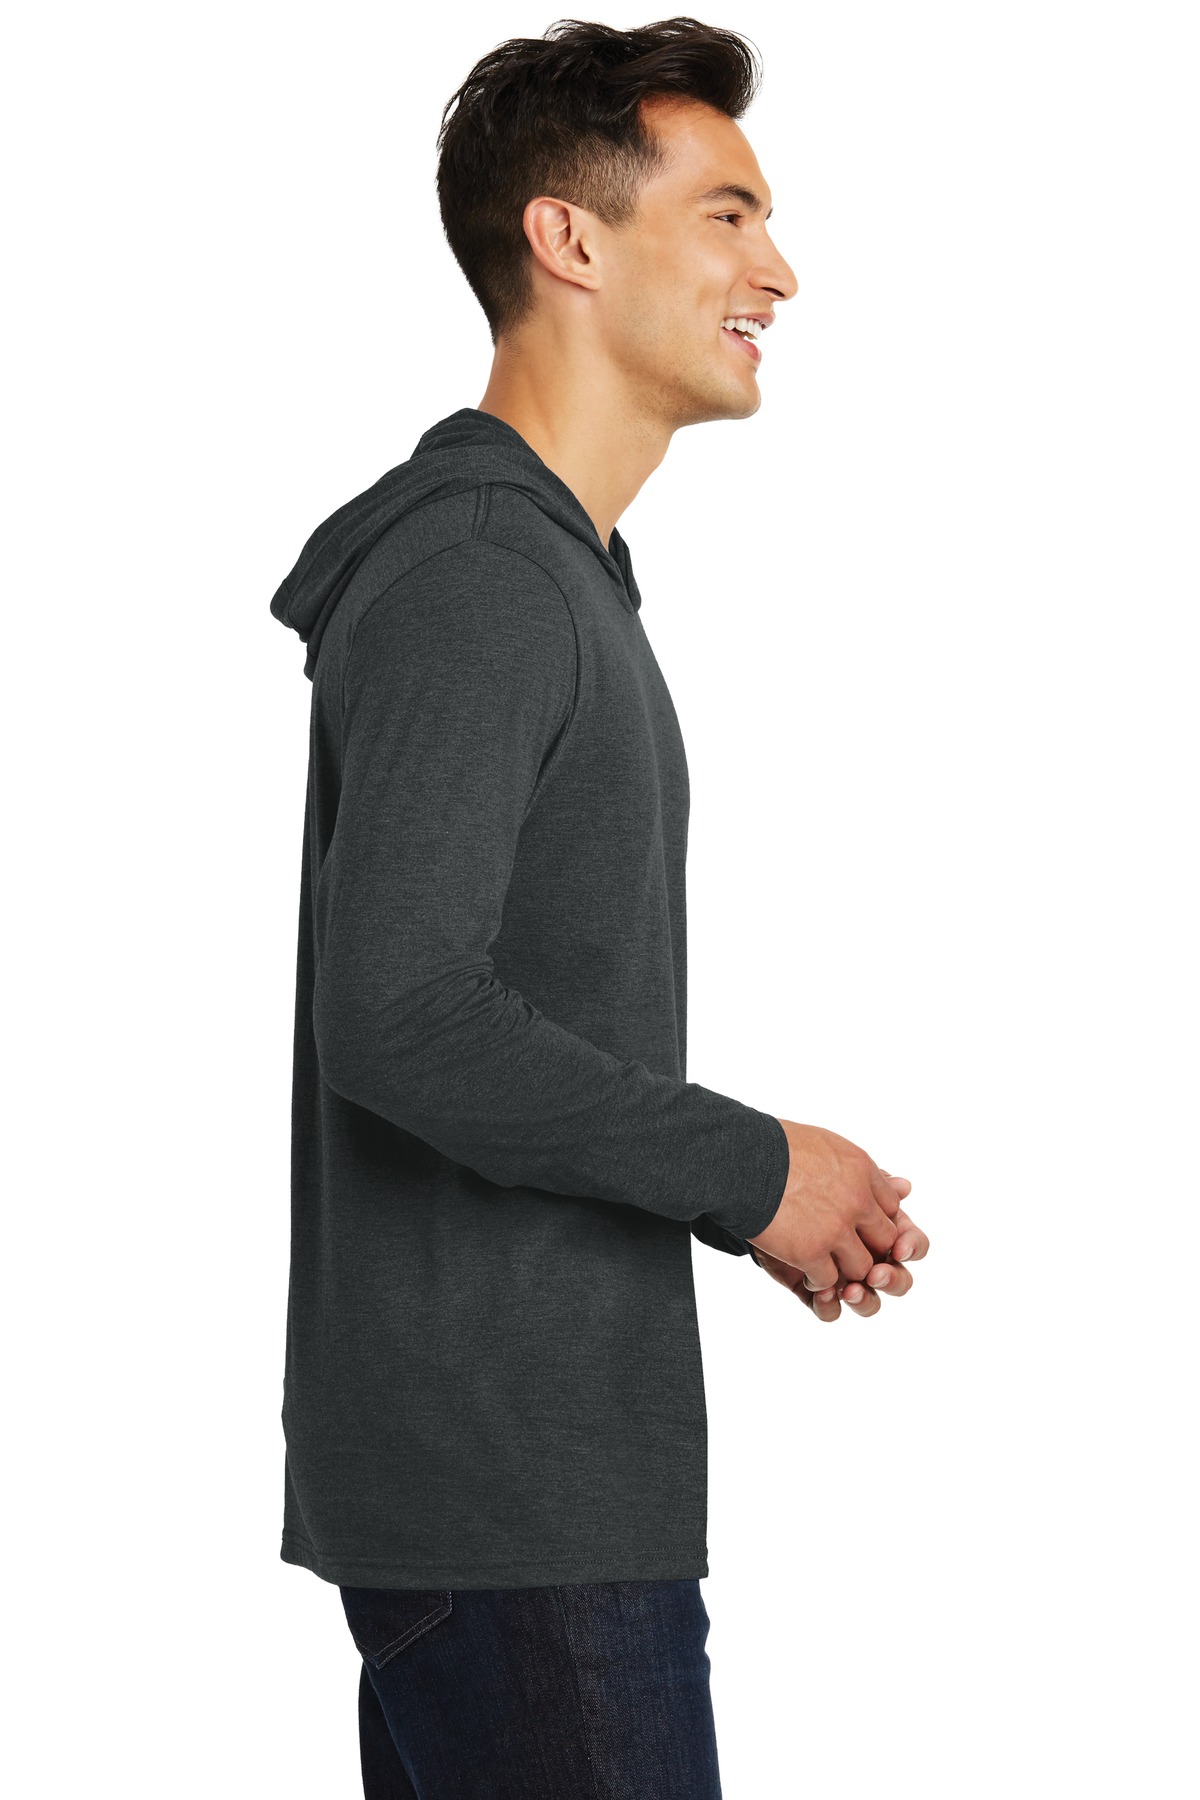 District Made Mens Perfect Tri Long Sleeve Hoodie-S (Black Frost) - image 3 of 6